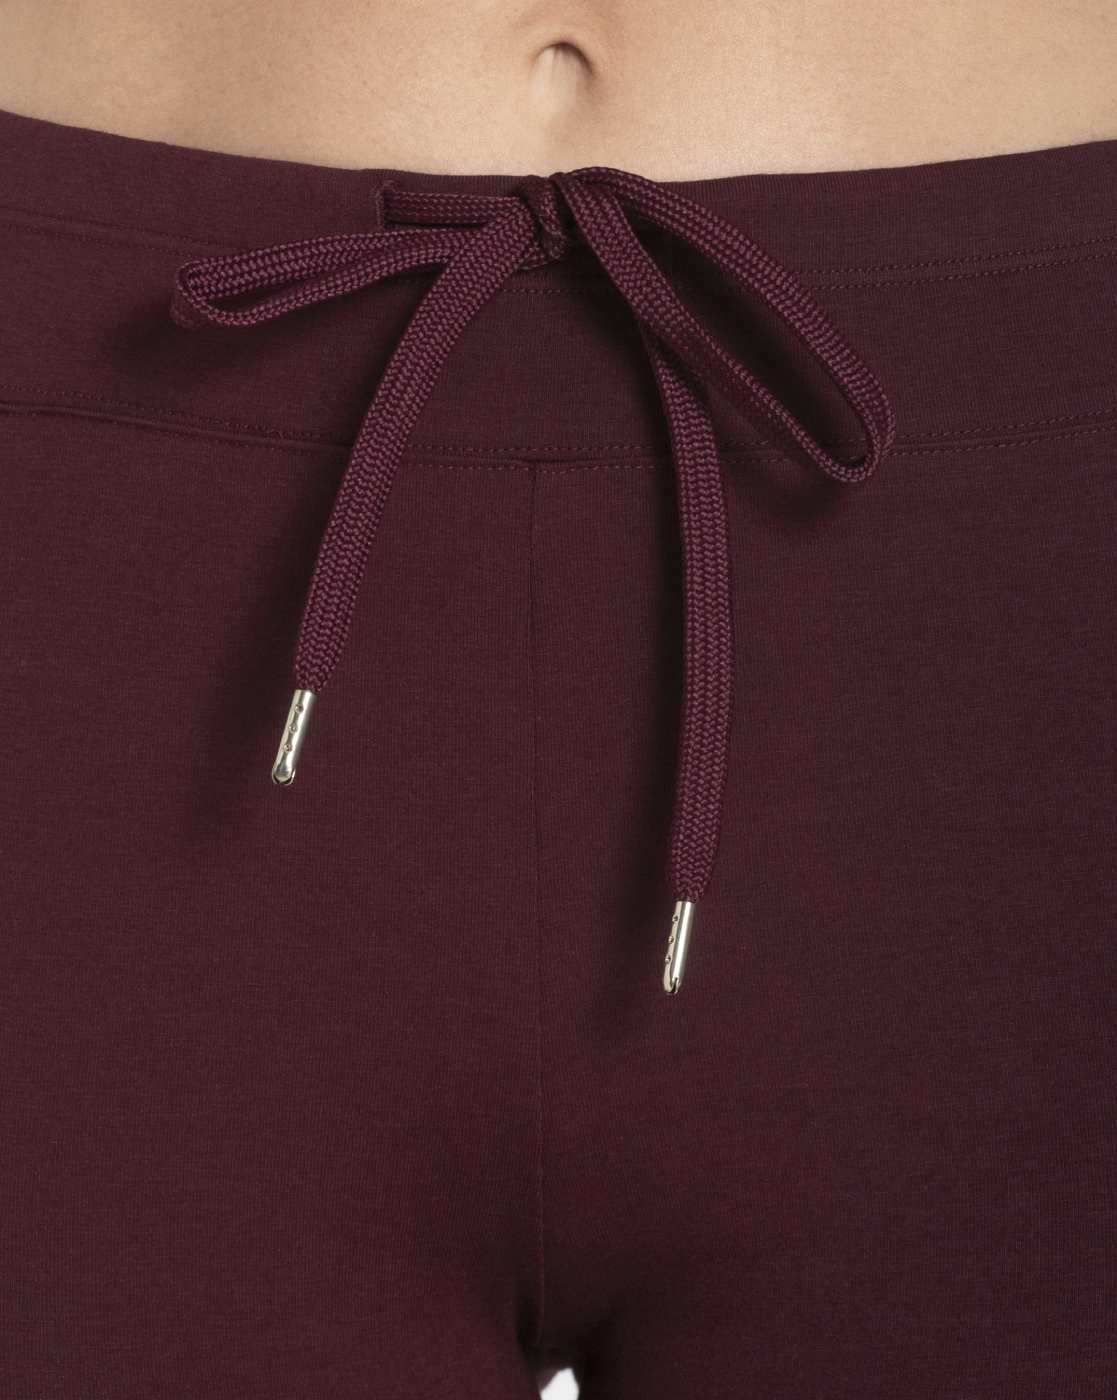 Buy Women's Super Combed Cotton Elastane Stretch Yoga Pants with Side  Zipper Pockets - Wine Tasting Printed AA01